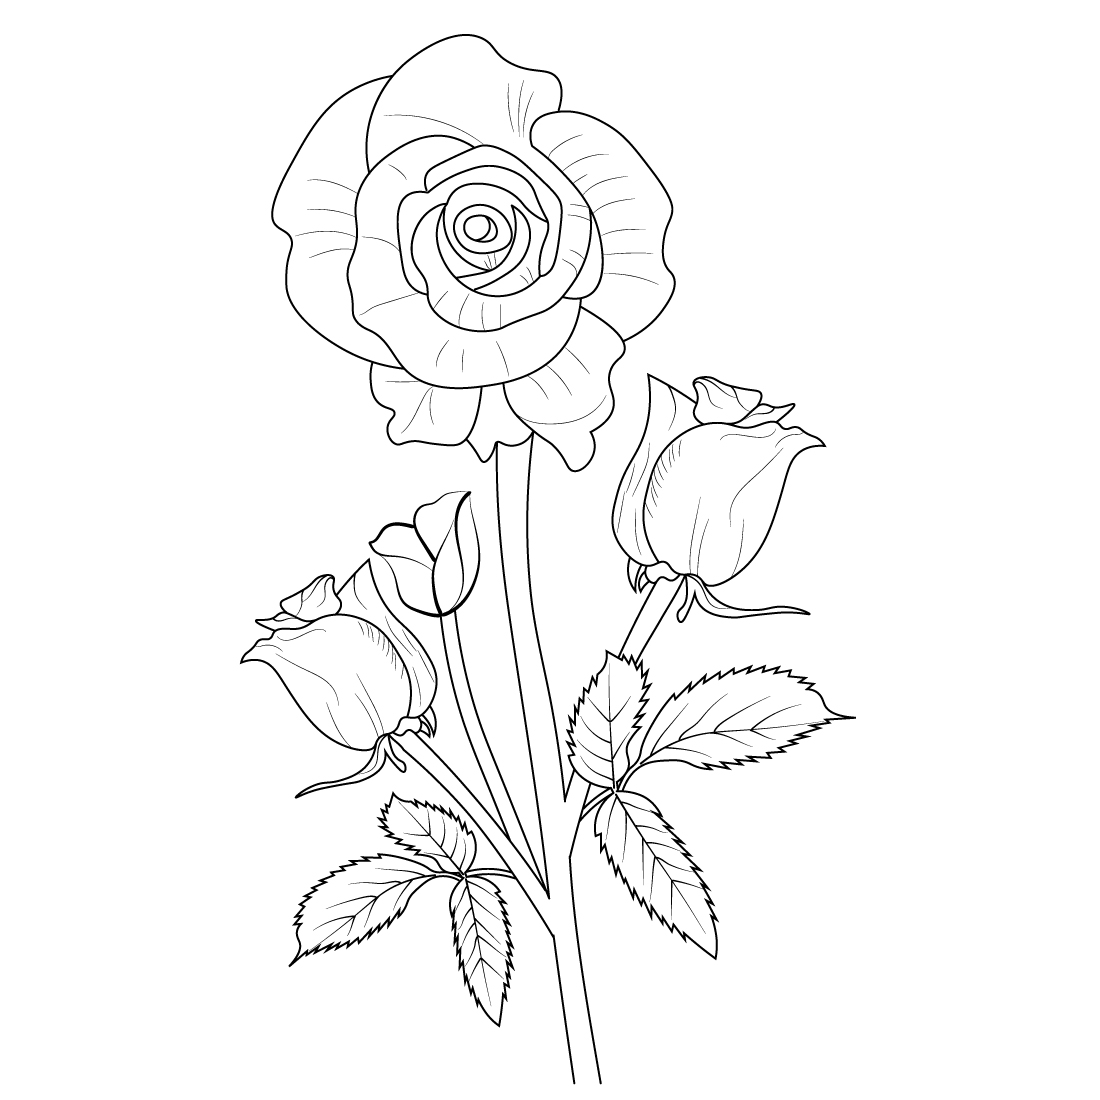 Related image | Rose sketch, Roses drawing, Flower sketches